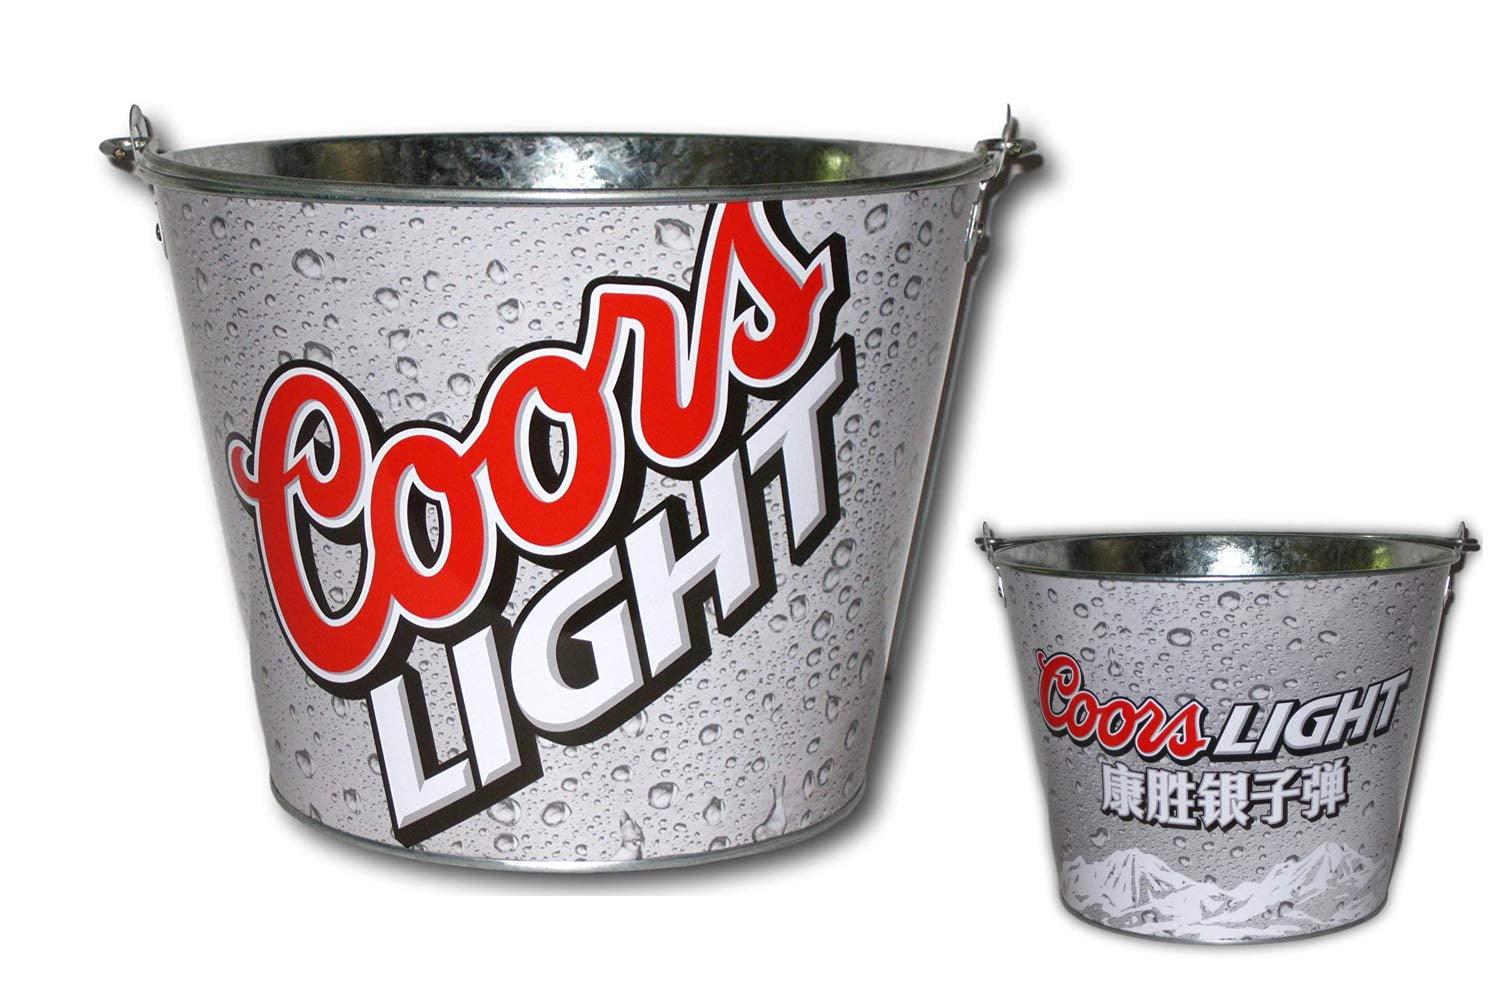 New & Free Shipping 1 One Coors Light New York Giants 5 Quart Ice Bucket 